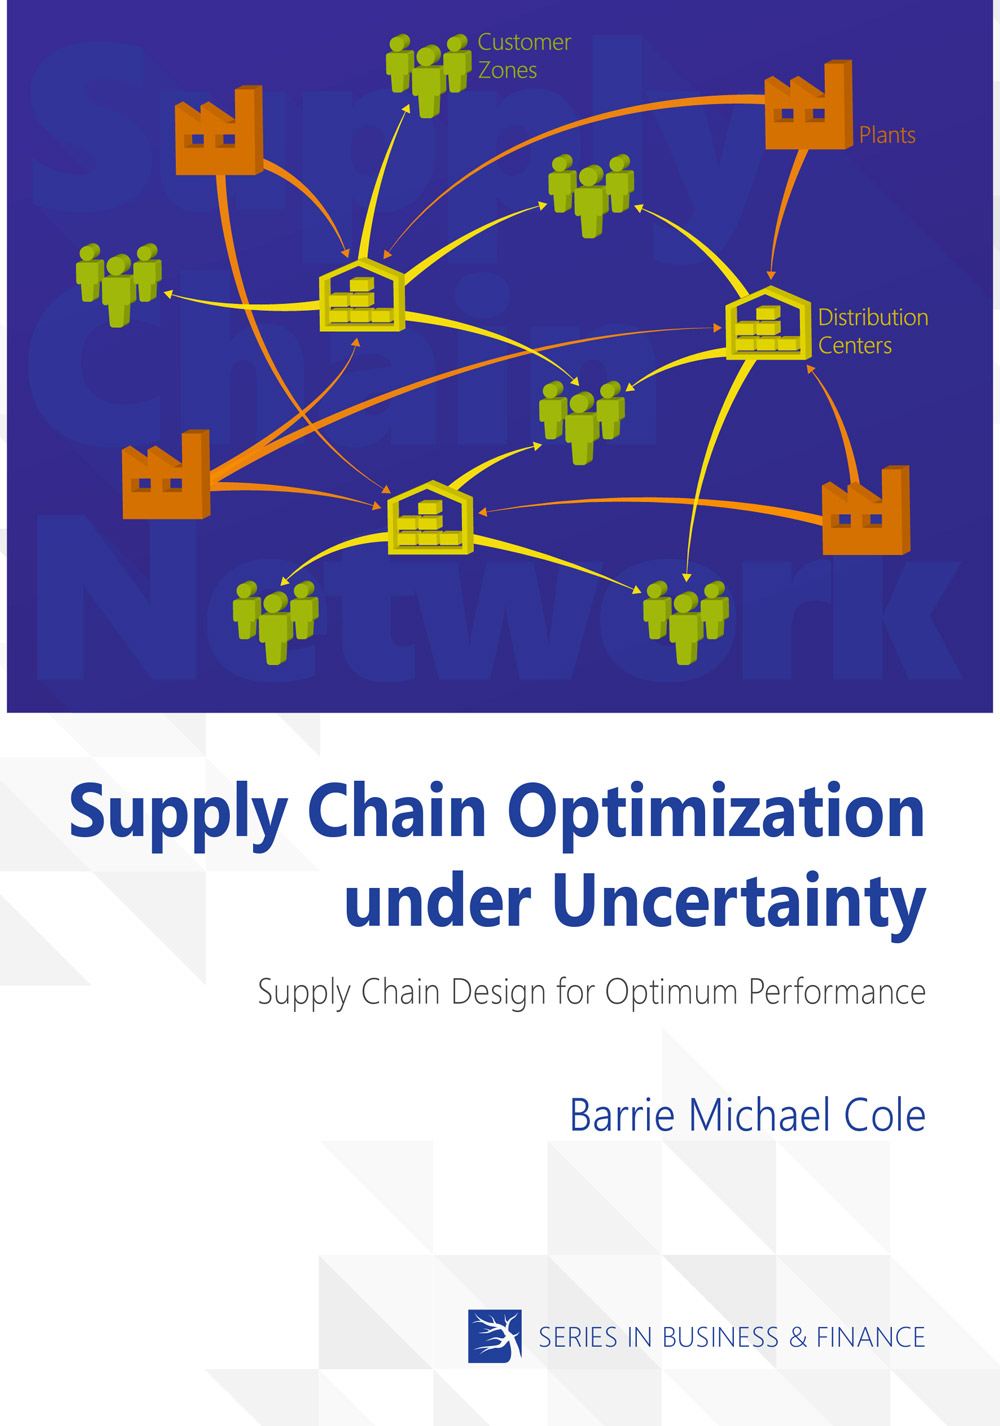 supply chain uncertainty case study